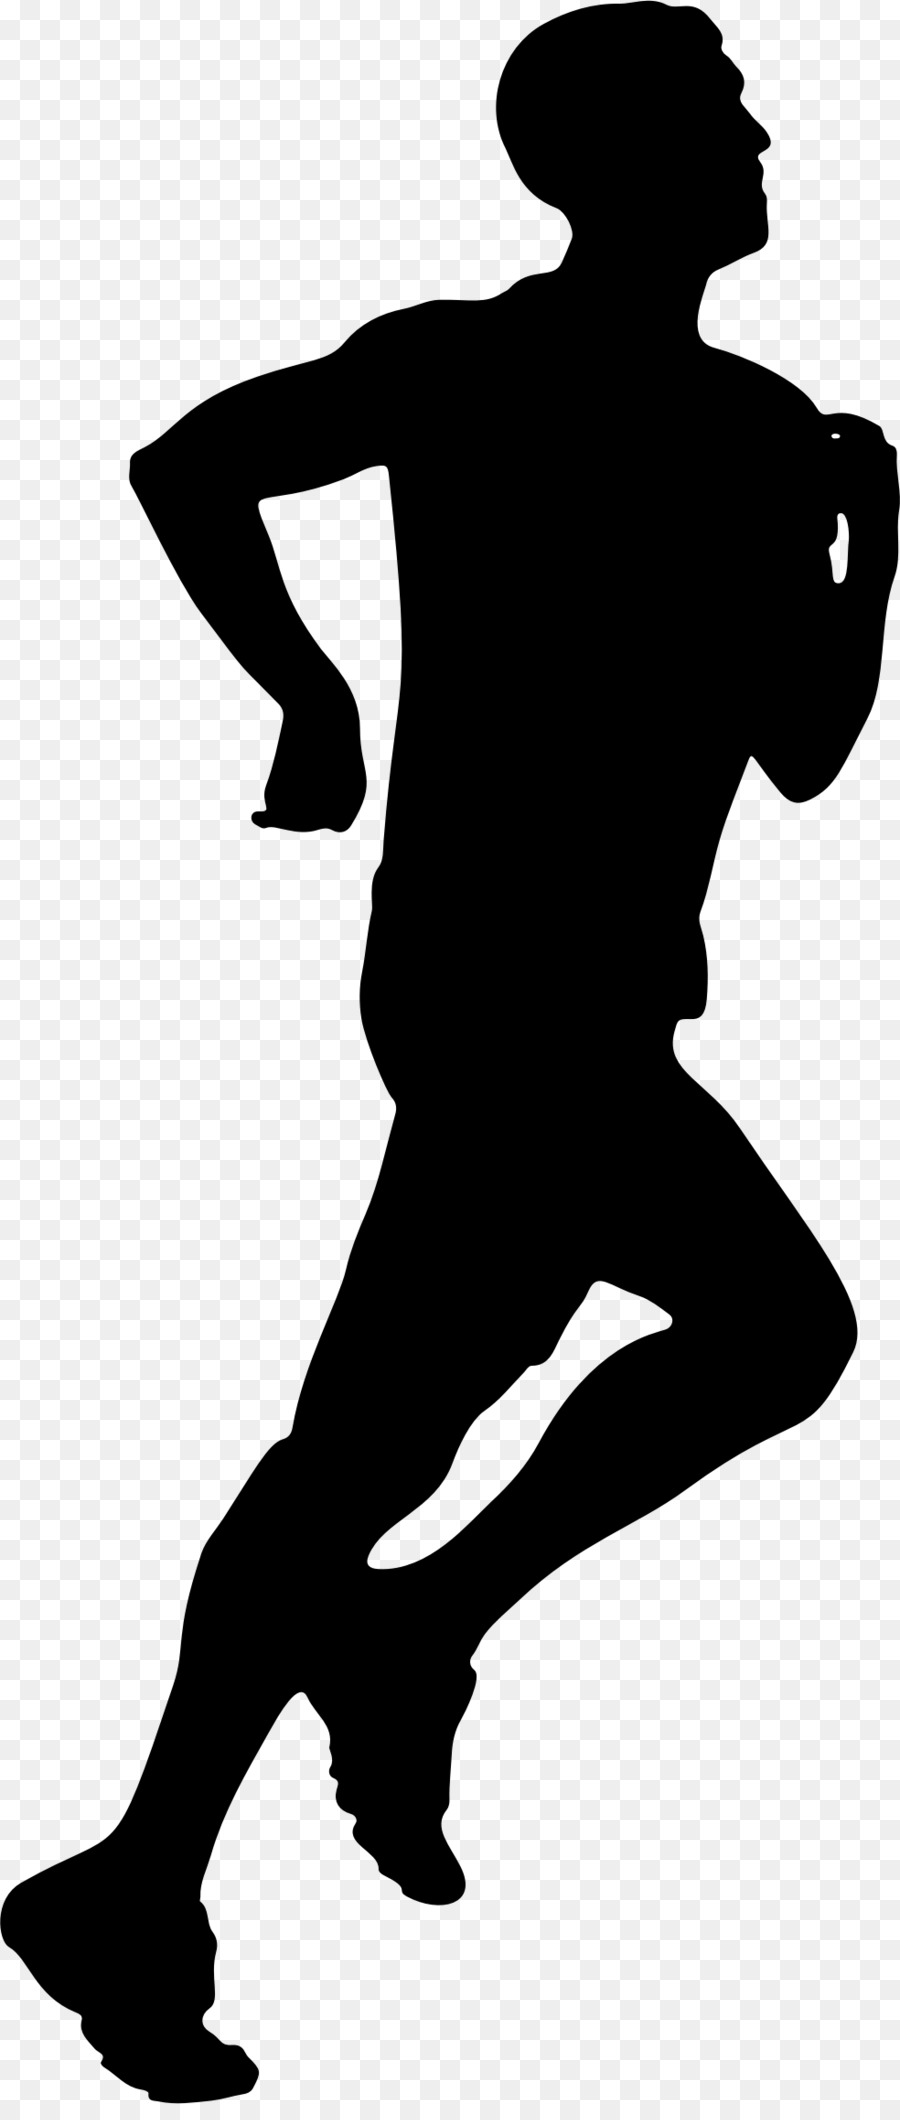 Jogging Silhouette Running Clip art - man silhouette png download - 984*2300 - Free Transparent Jogging png Download.